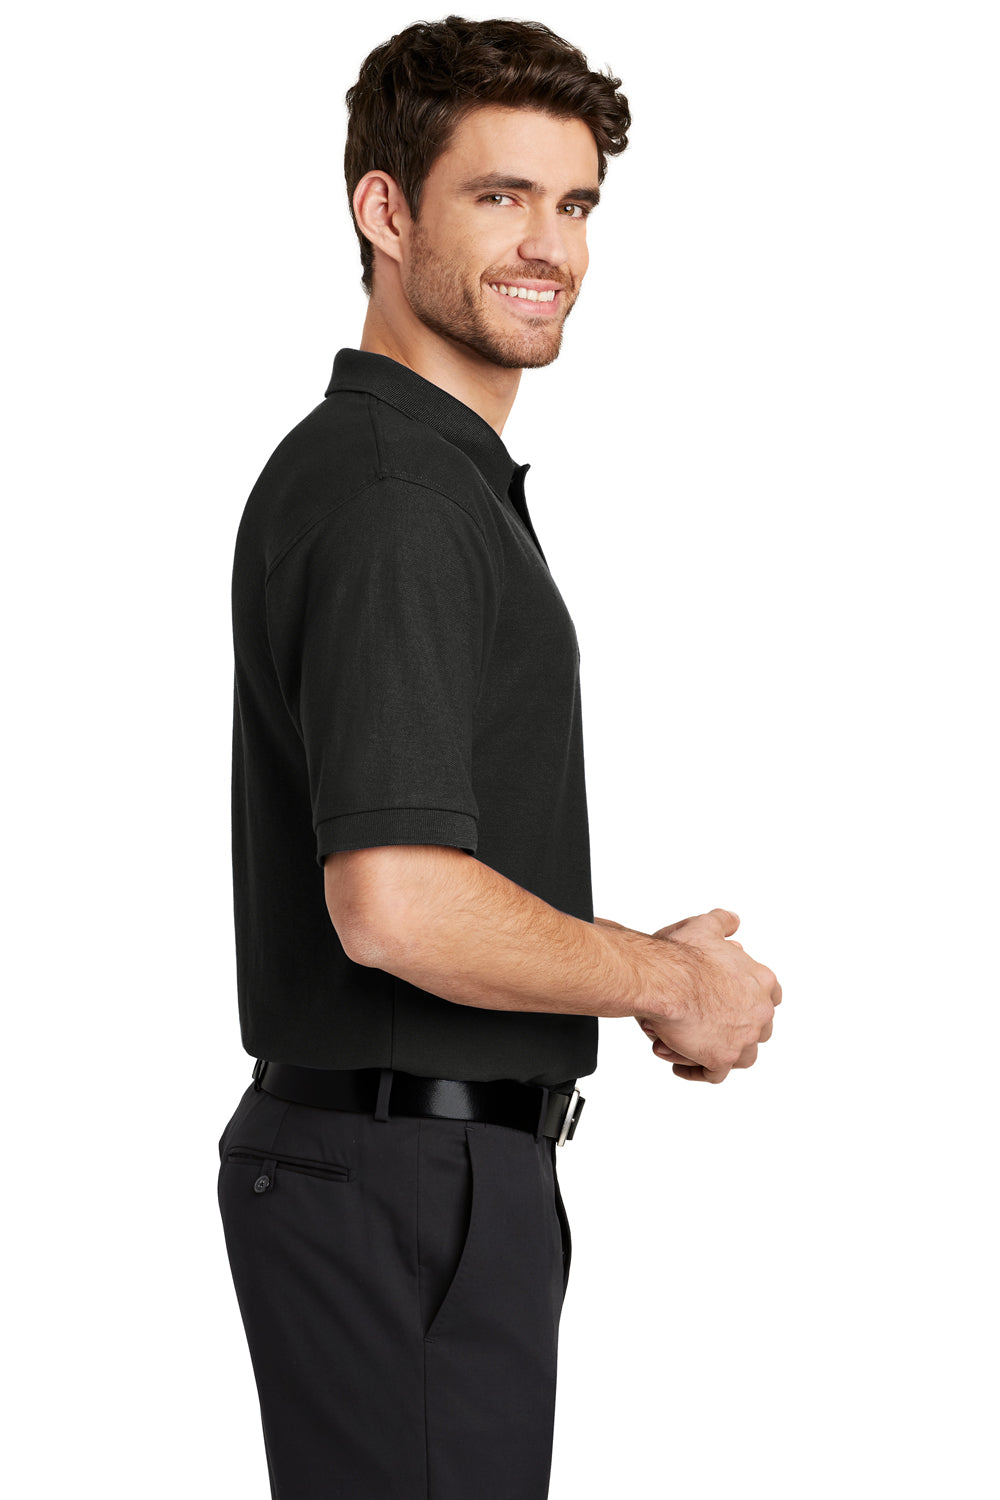 Port Authority K500P Mens Silk Touch Wrinkle Resistant Short Sleeve Polo Shirt w/ Pocket Black Side